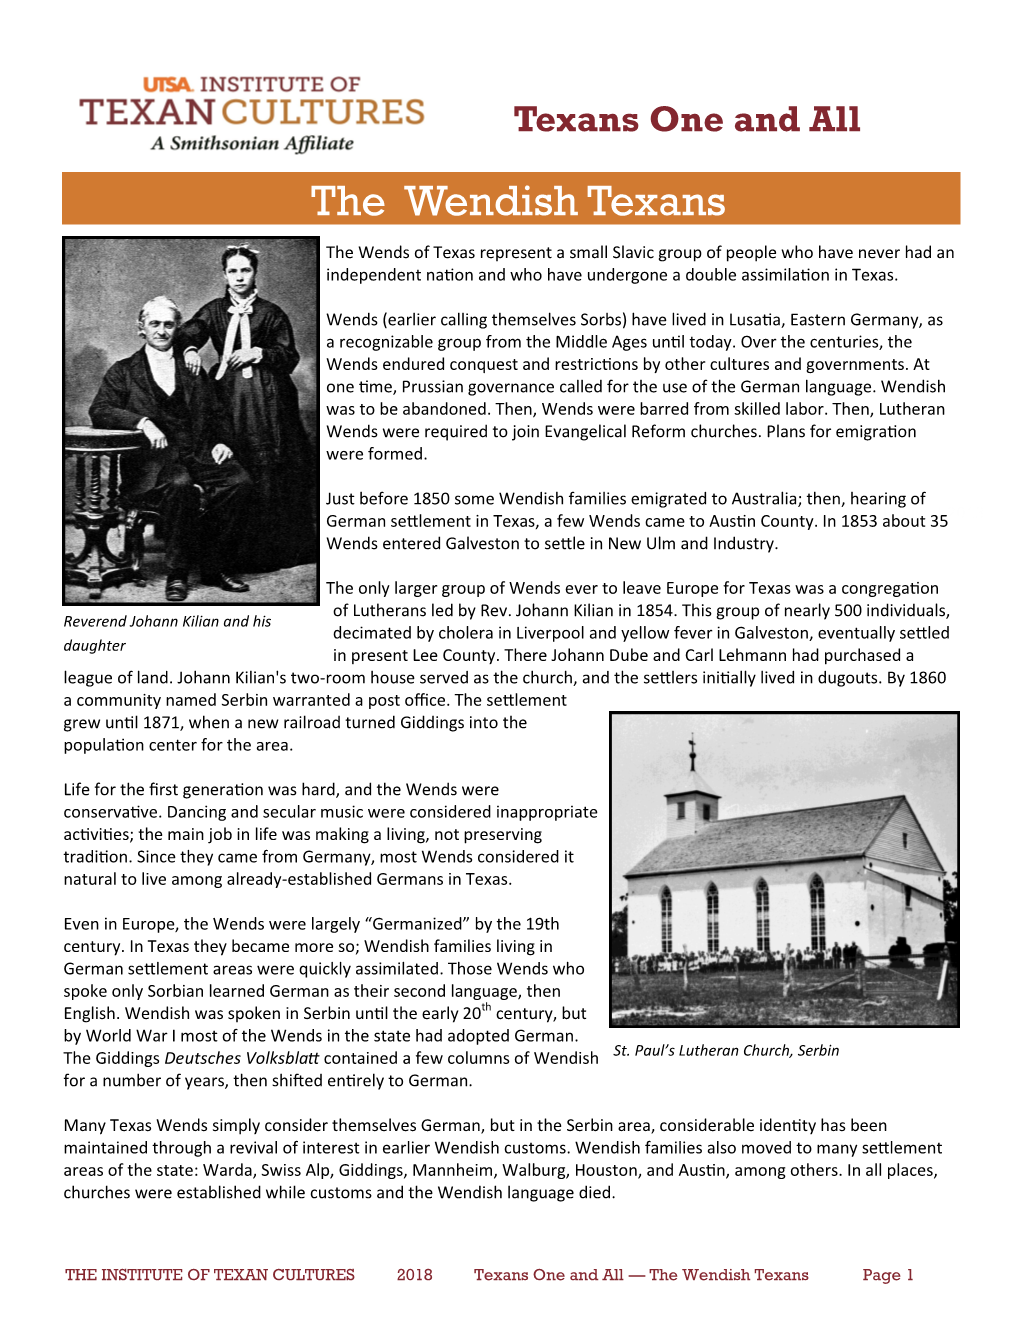 The Wendish Texans